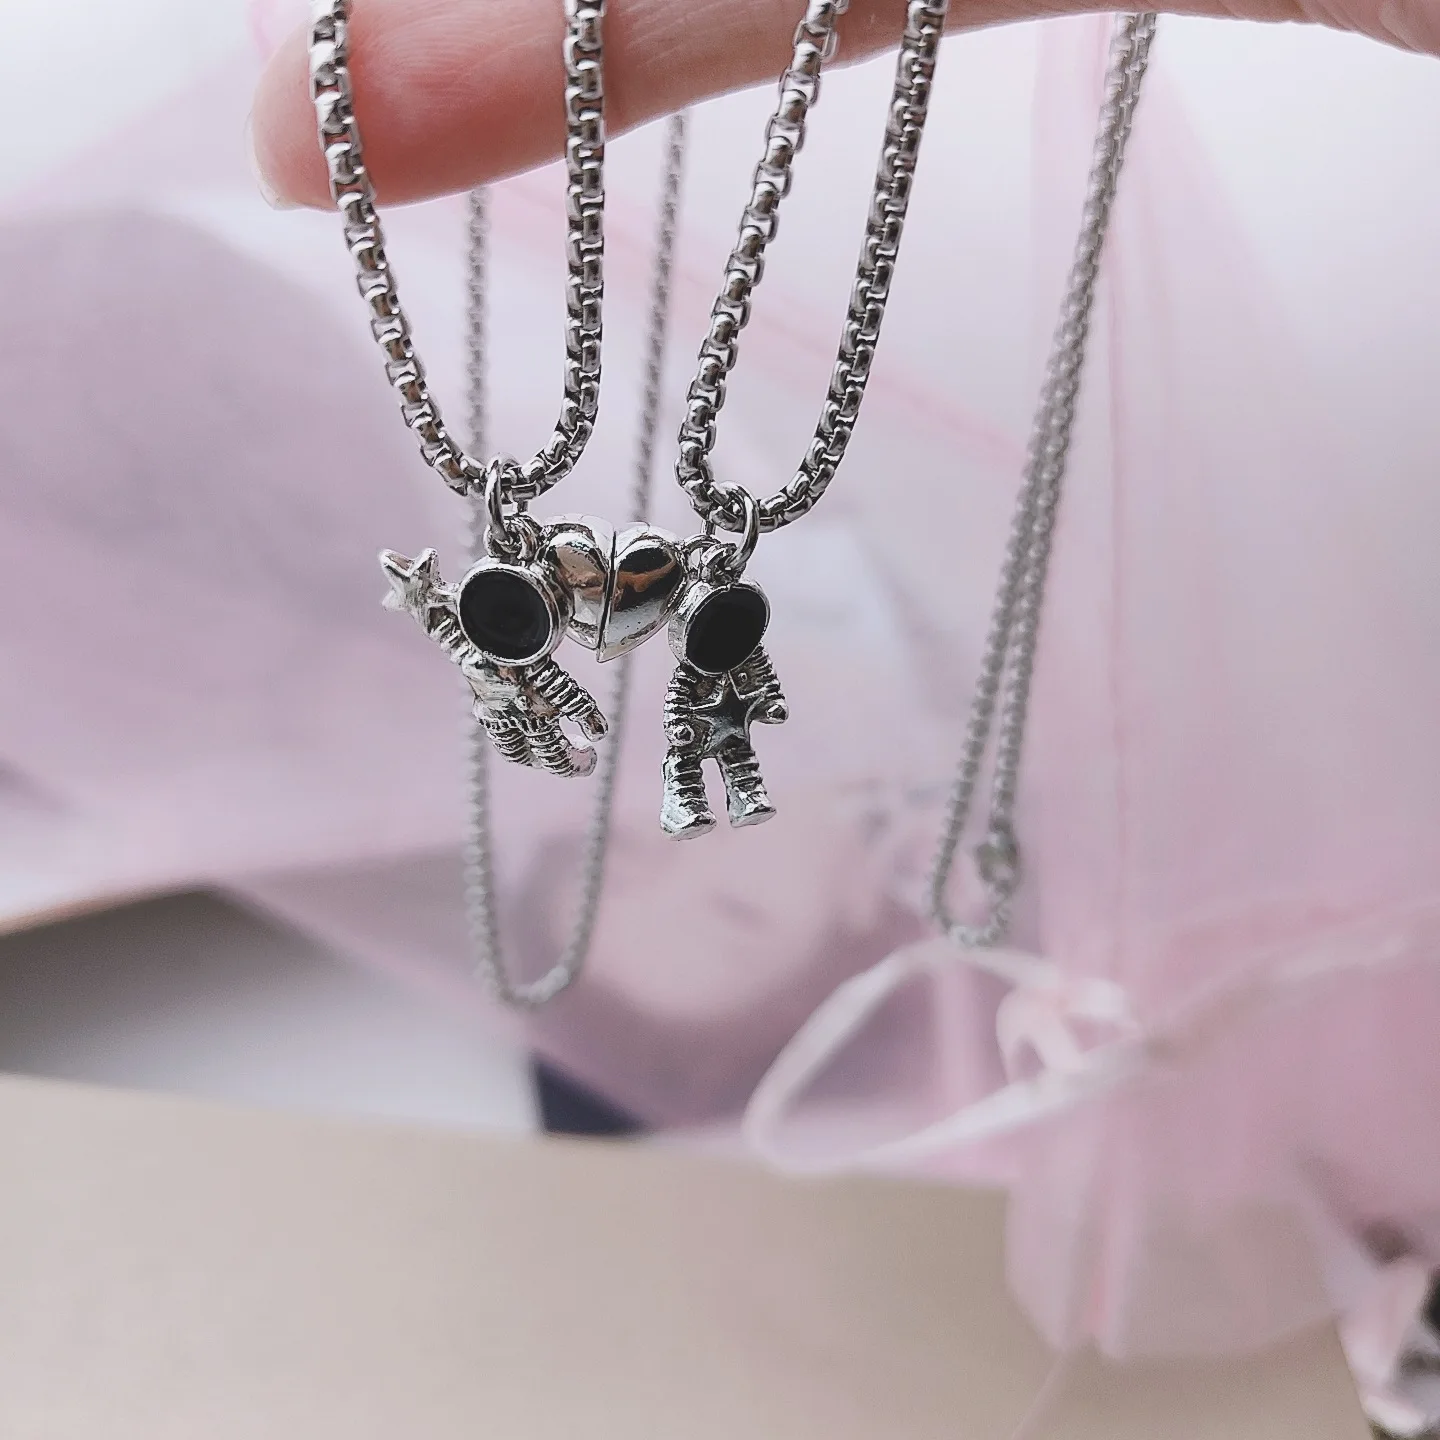 LATS Fashion Magnetic Couple Necklace for Lovers Gothic Punk : kpopita